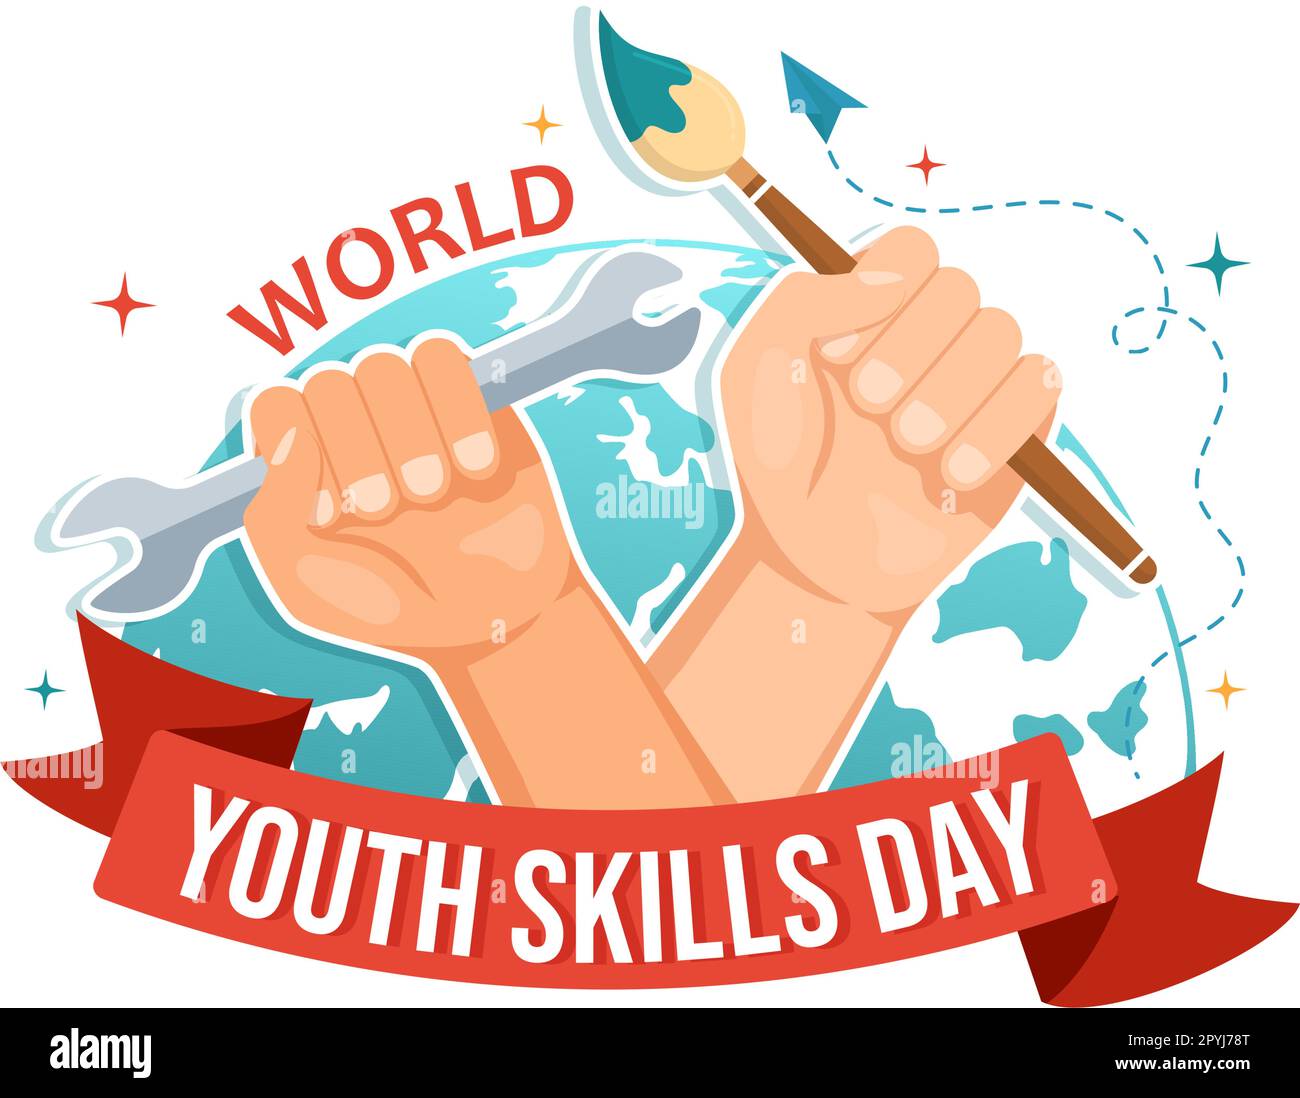 World Youth Skills Day Vector Illustration of People with Skill for Various Employment and Entrepreneurship in Flat Cartoon Hand Drawn Templates Stock Vector